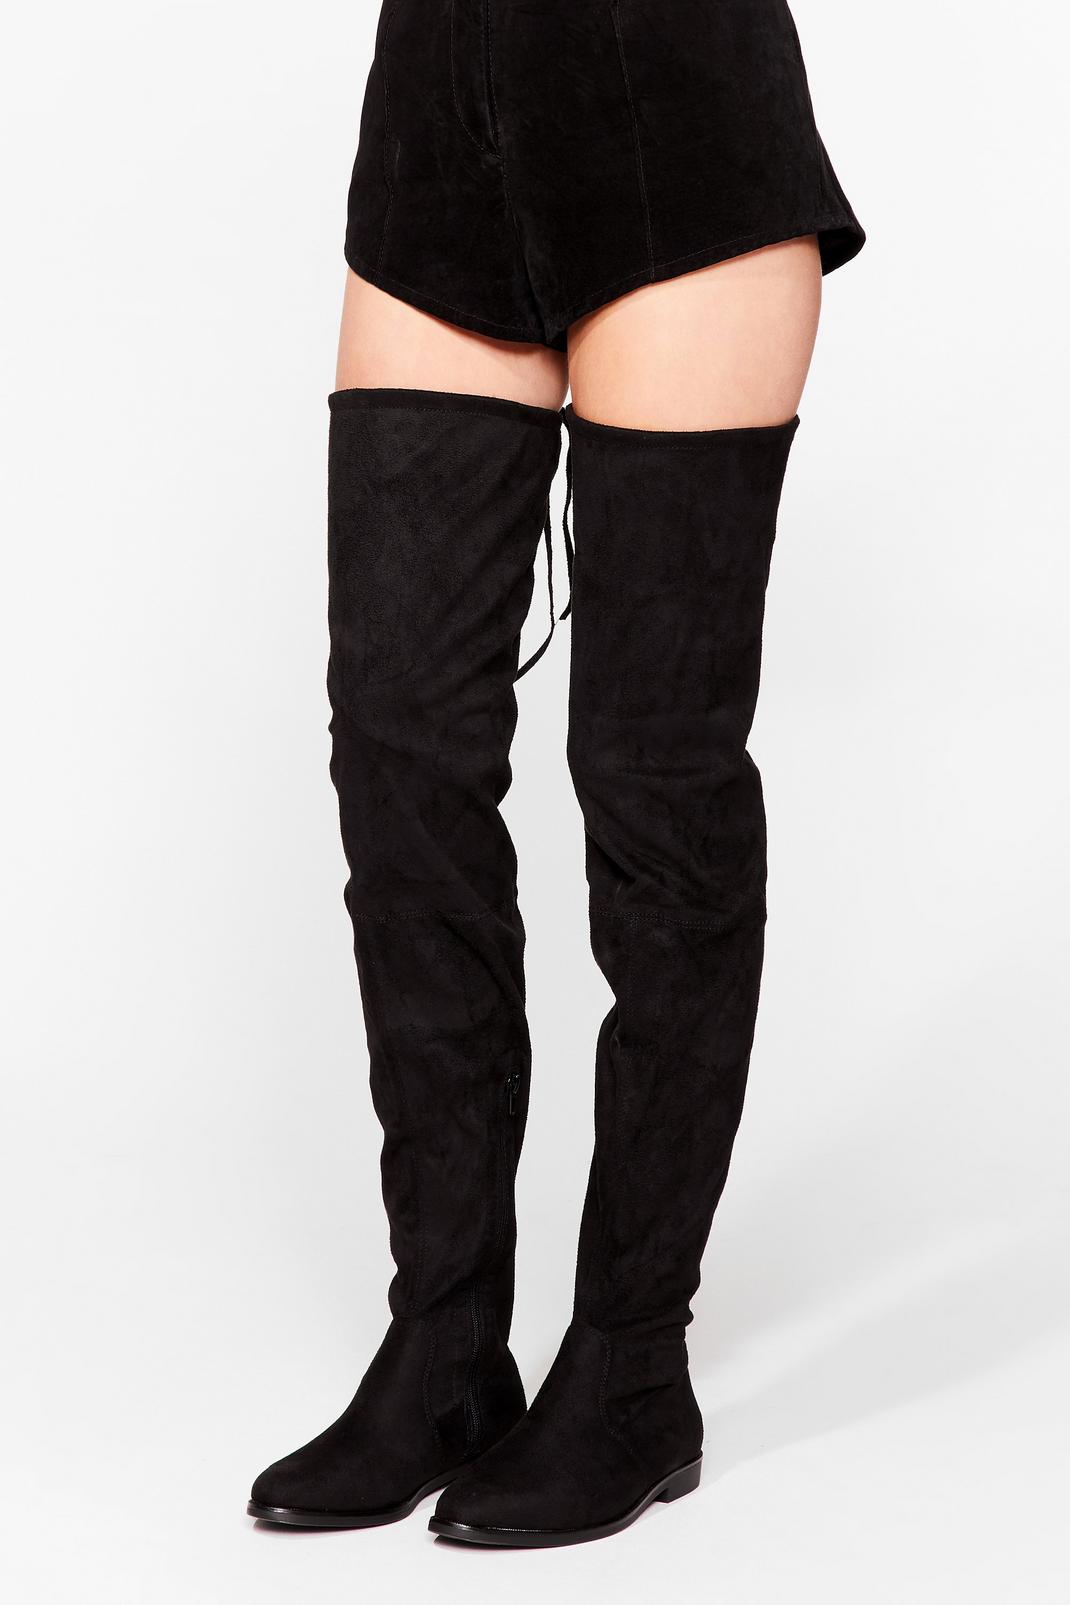 Black Start Over-the-Knee Faux Suede Boots image number 1